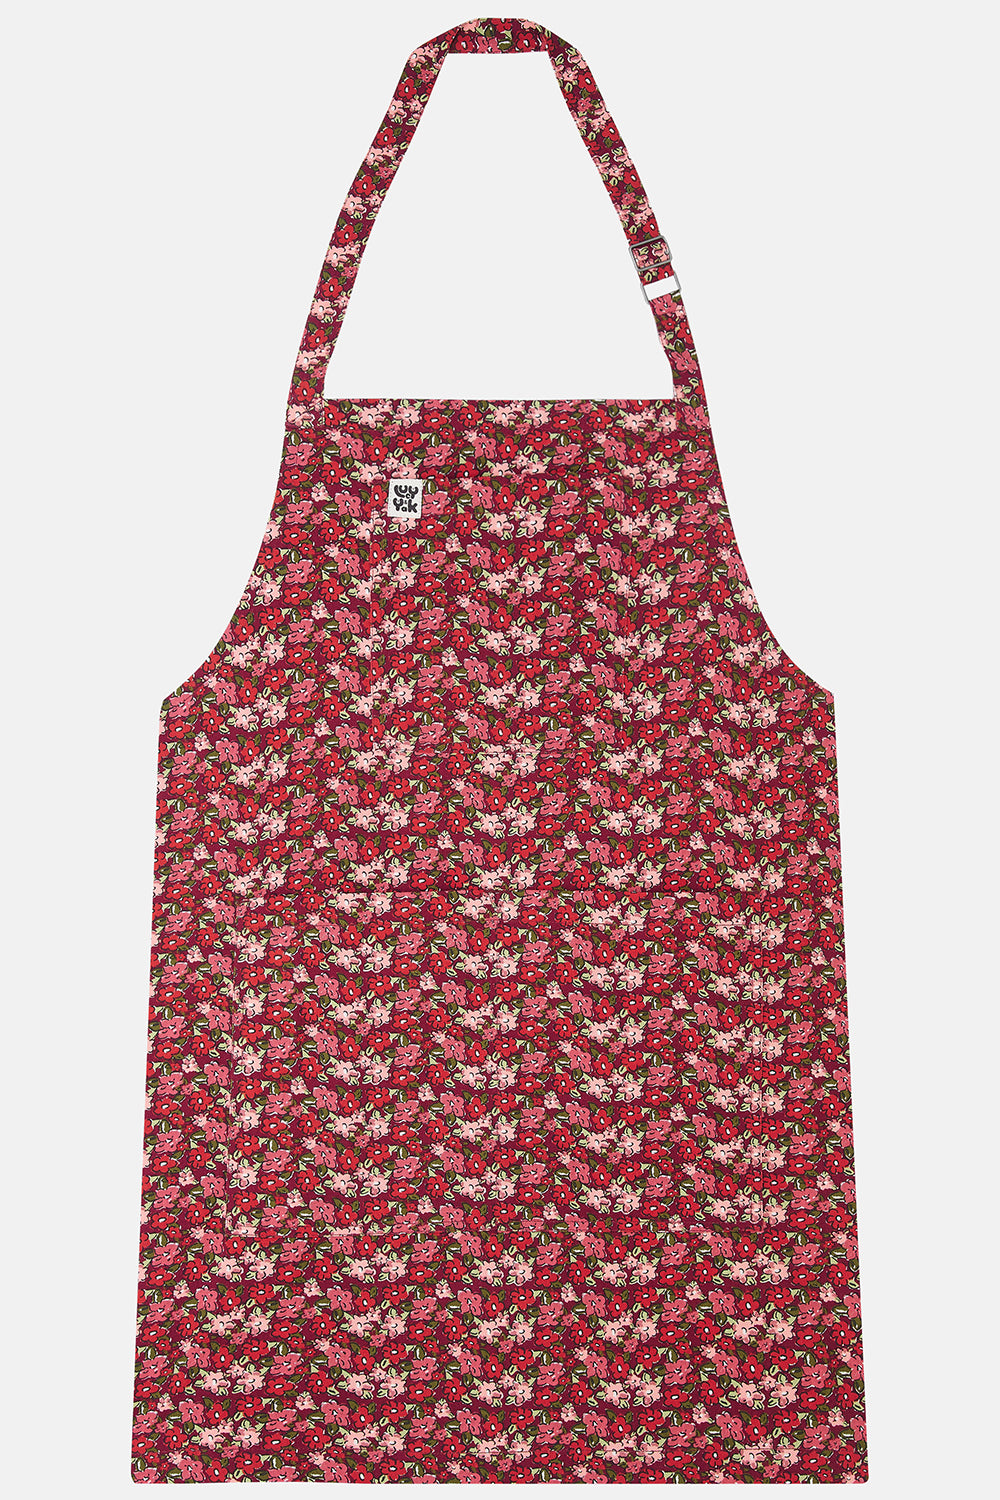 Ada Apron: DEADSTOCK FABRIC - Cicely Print